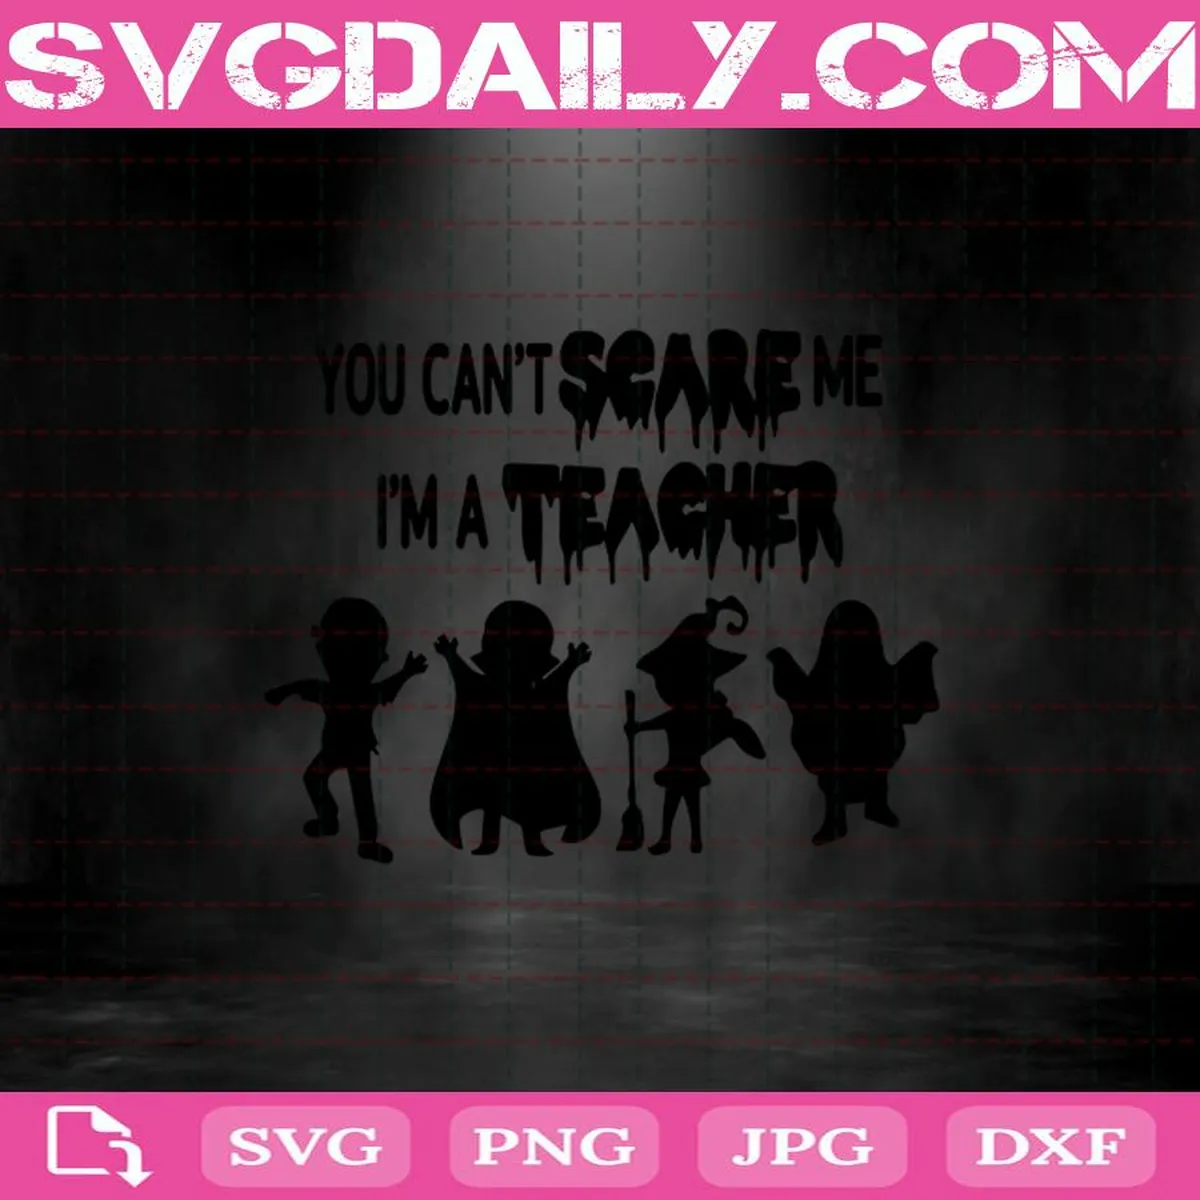 You Can’t Scare Me I’m A Teacher Svg, Halloween Svg, Teacher Svg, Teacher Halloween Svg Dxf Eps Png Cutting File For Cricut